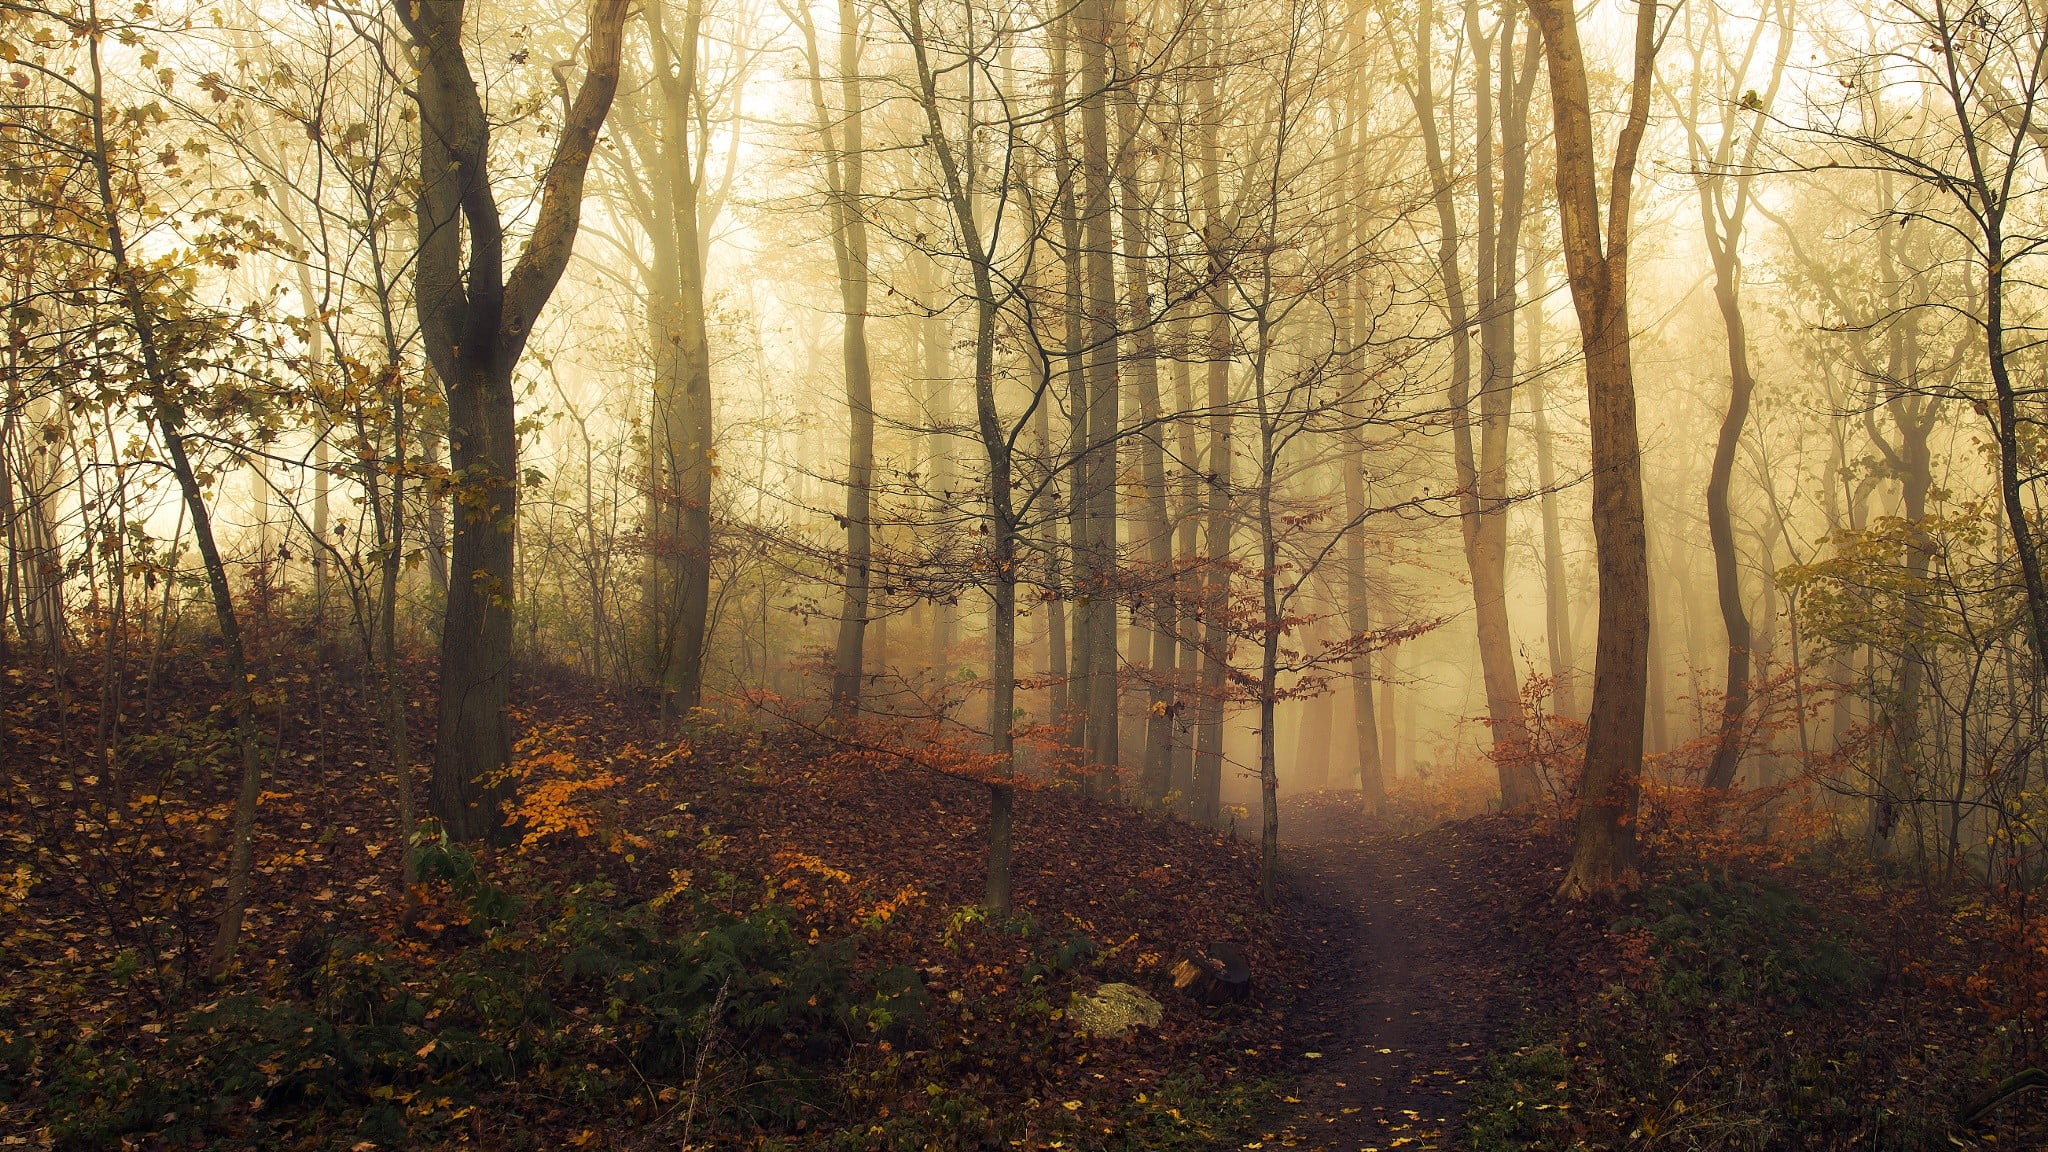 trees, landscape, nature, mist, path, fall, forest, plant, tranquility